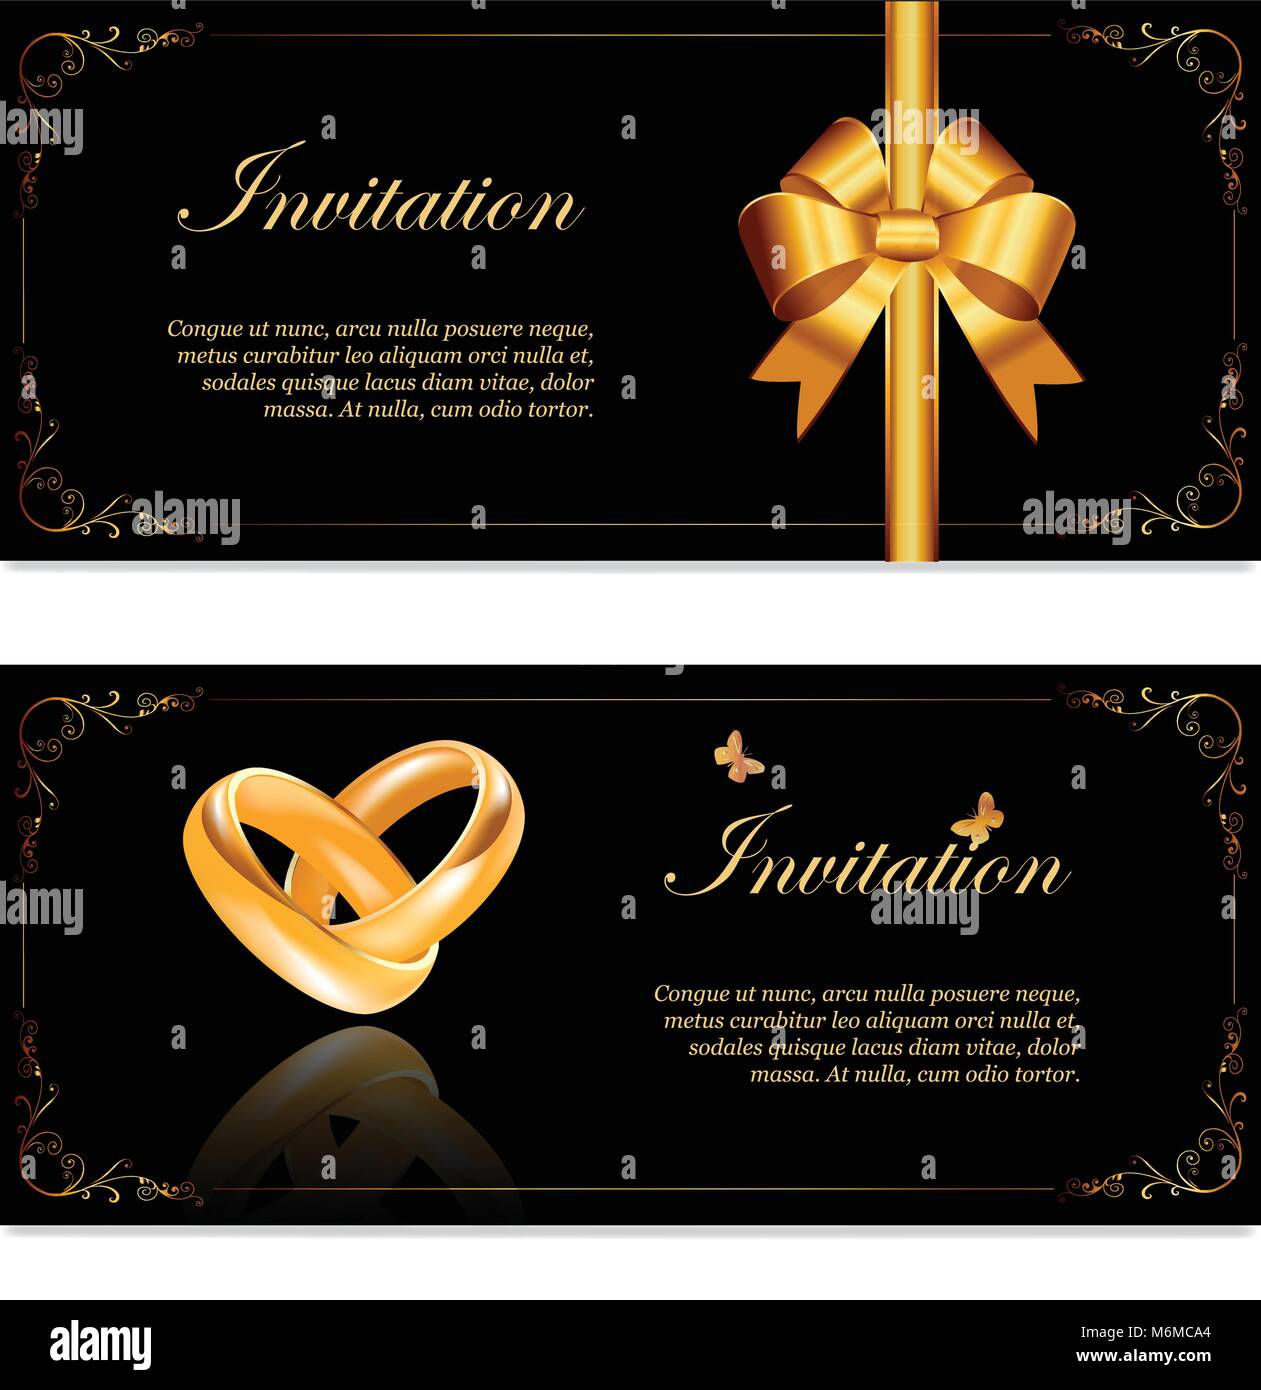 Indian Engagement Invitation Template Photos and Images & Pictures |  Shutterstock